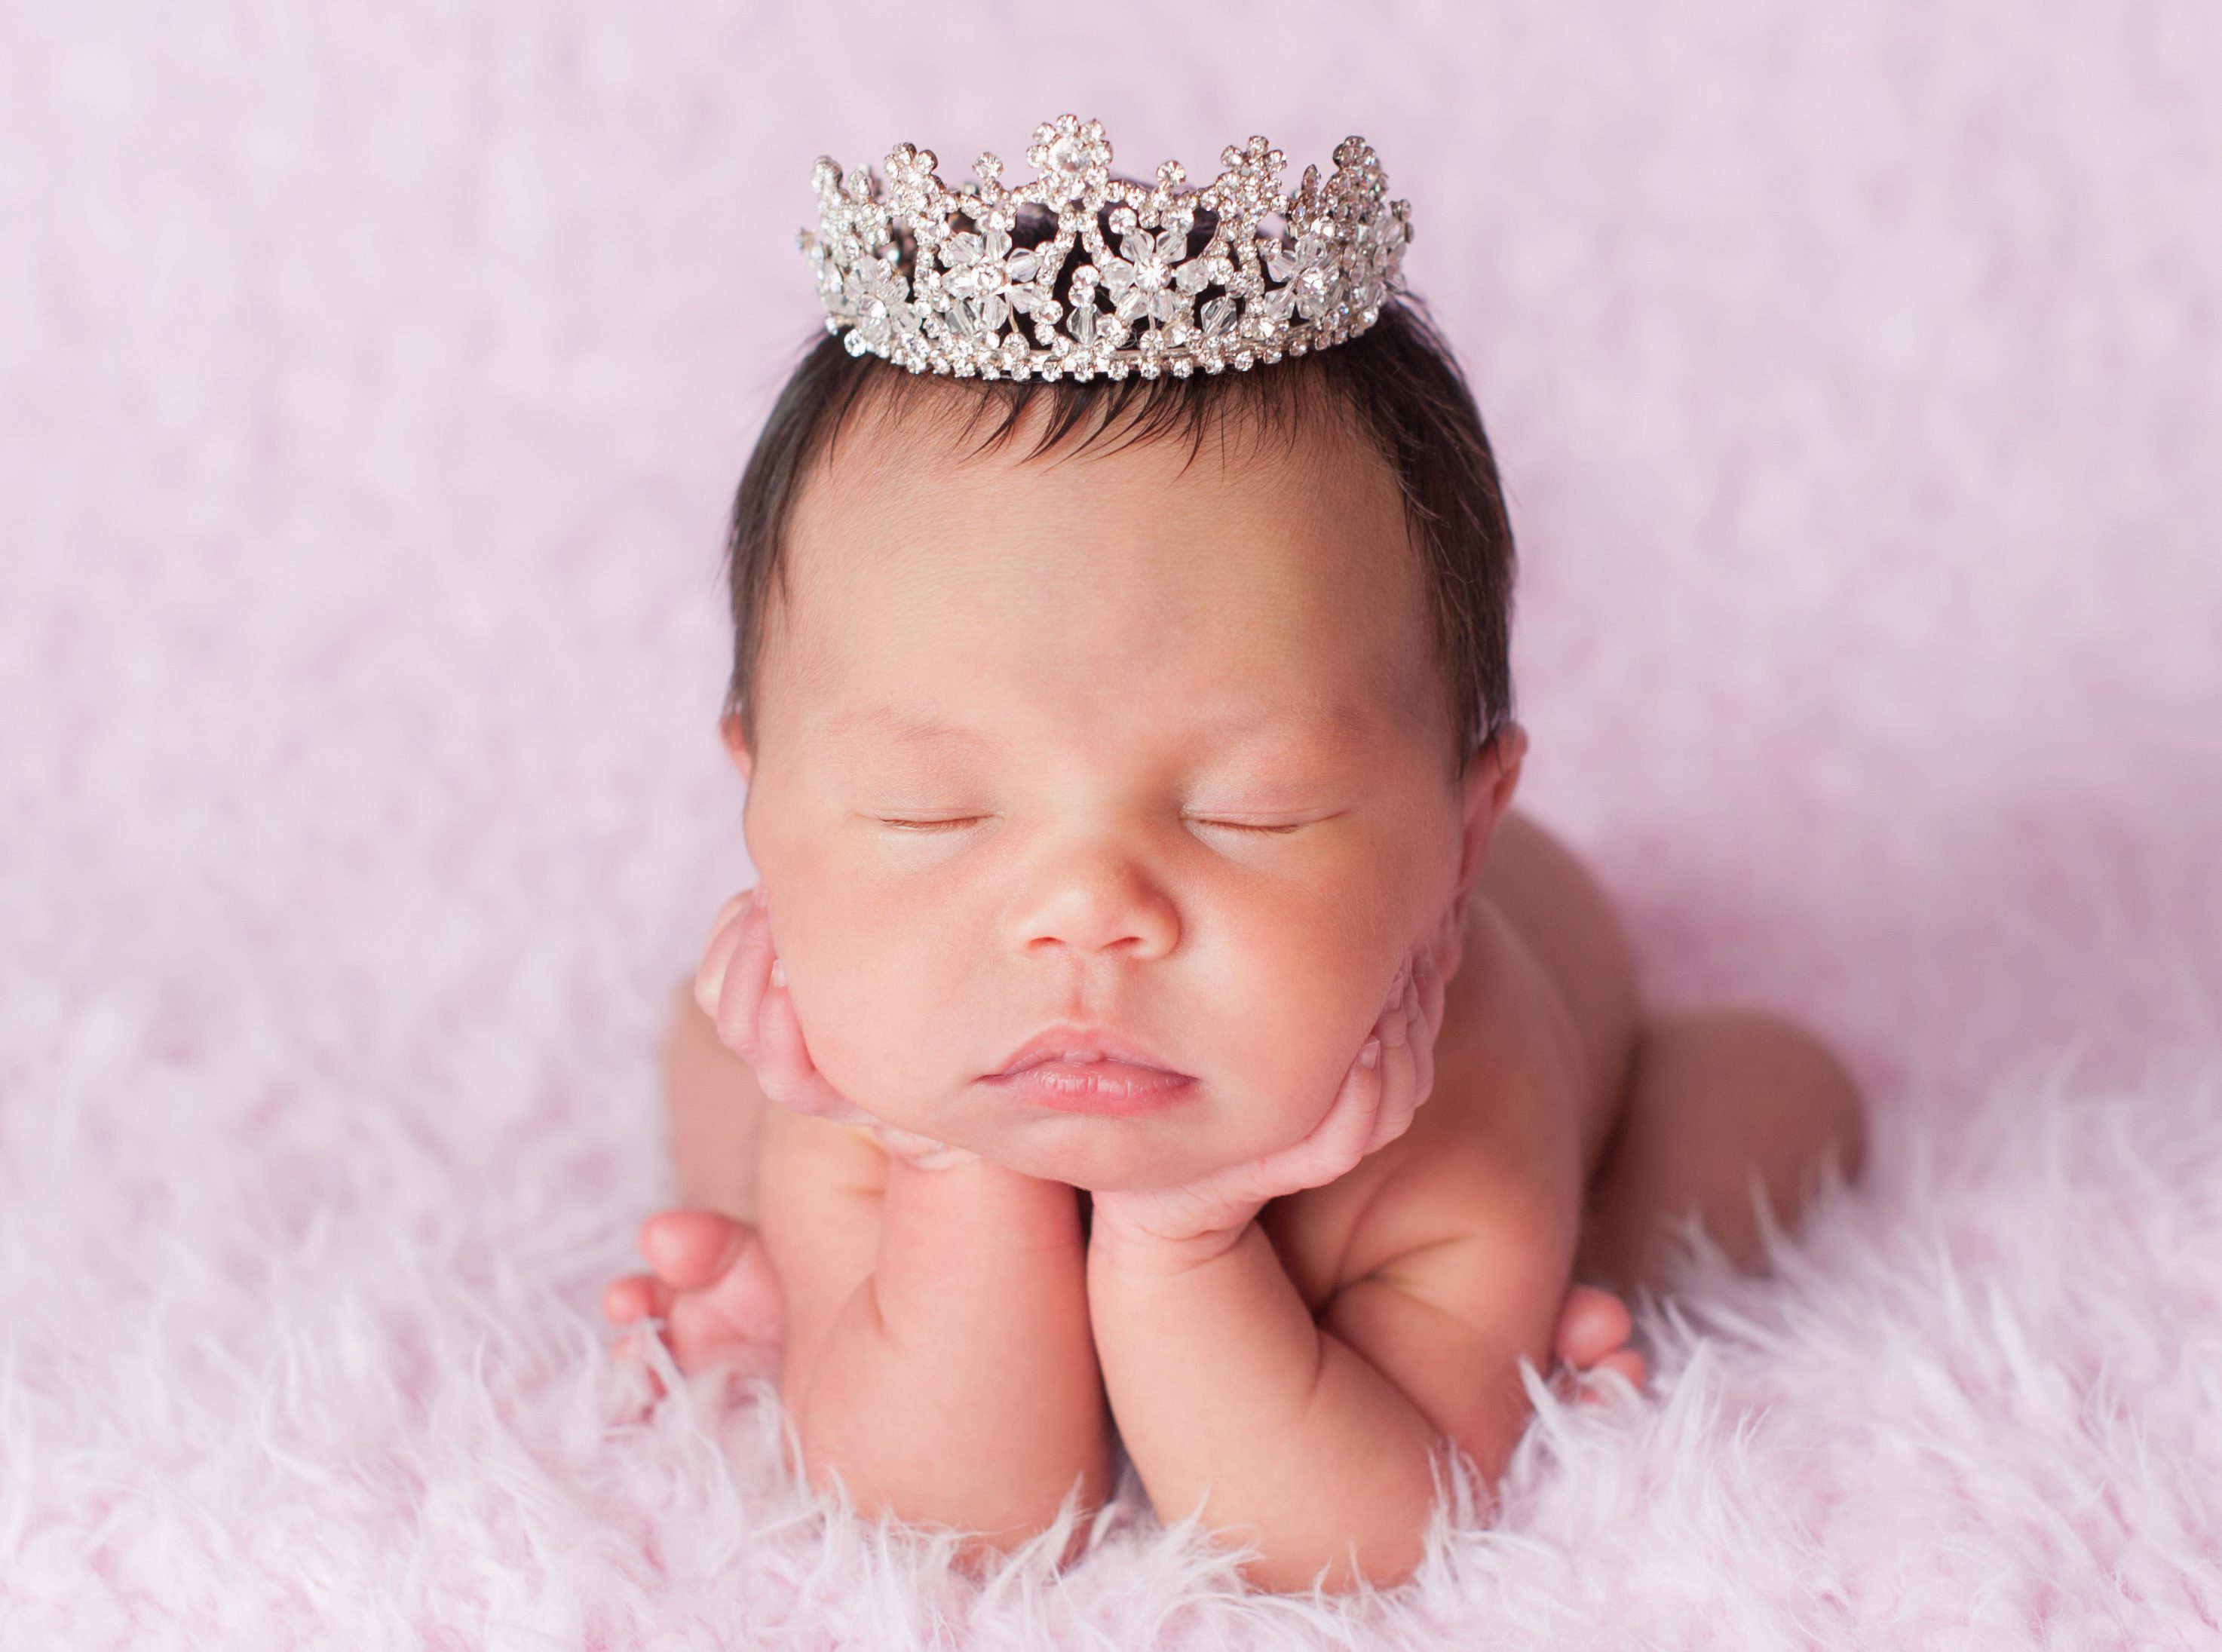 Bank Your Little Princess' cord blood with Cord For Life